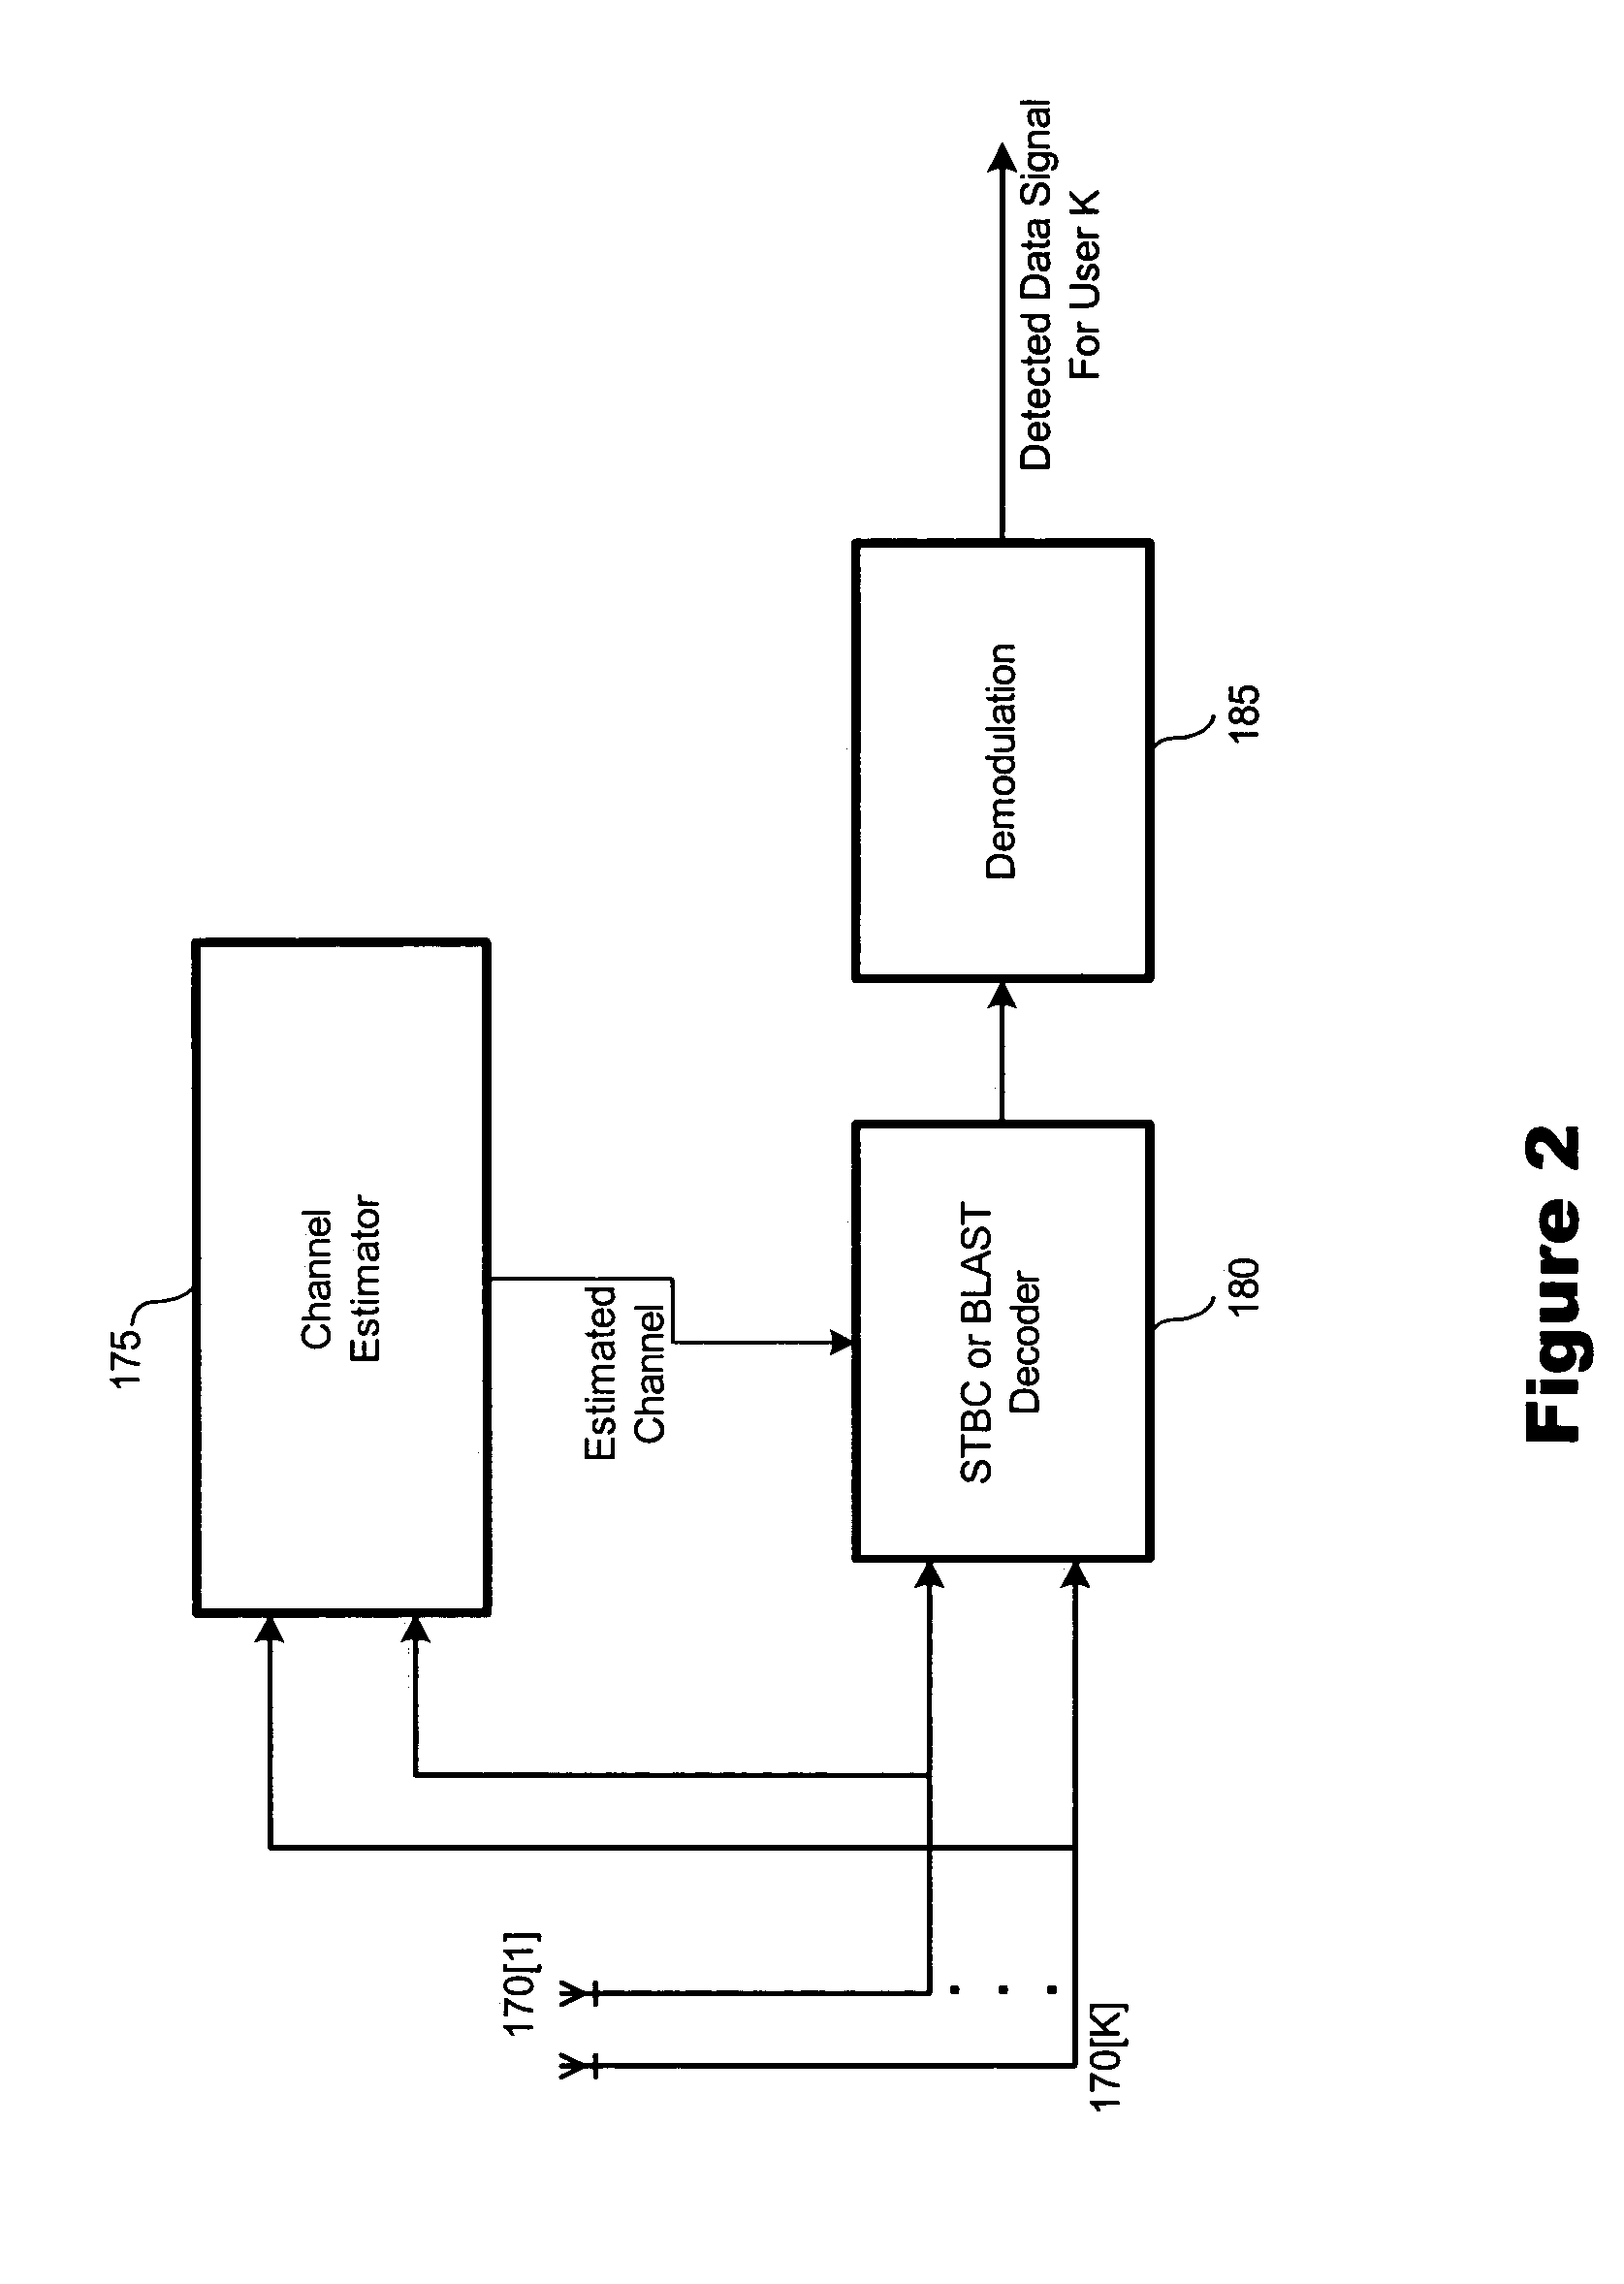 Scheduling method with tunable throughput maximization and fairness guarantees in resource allocation